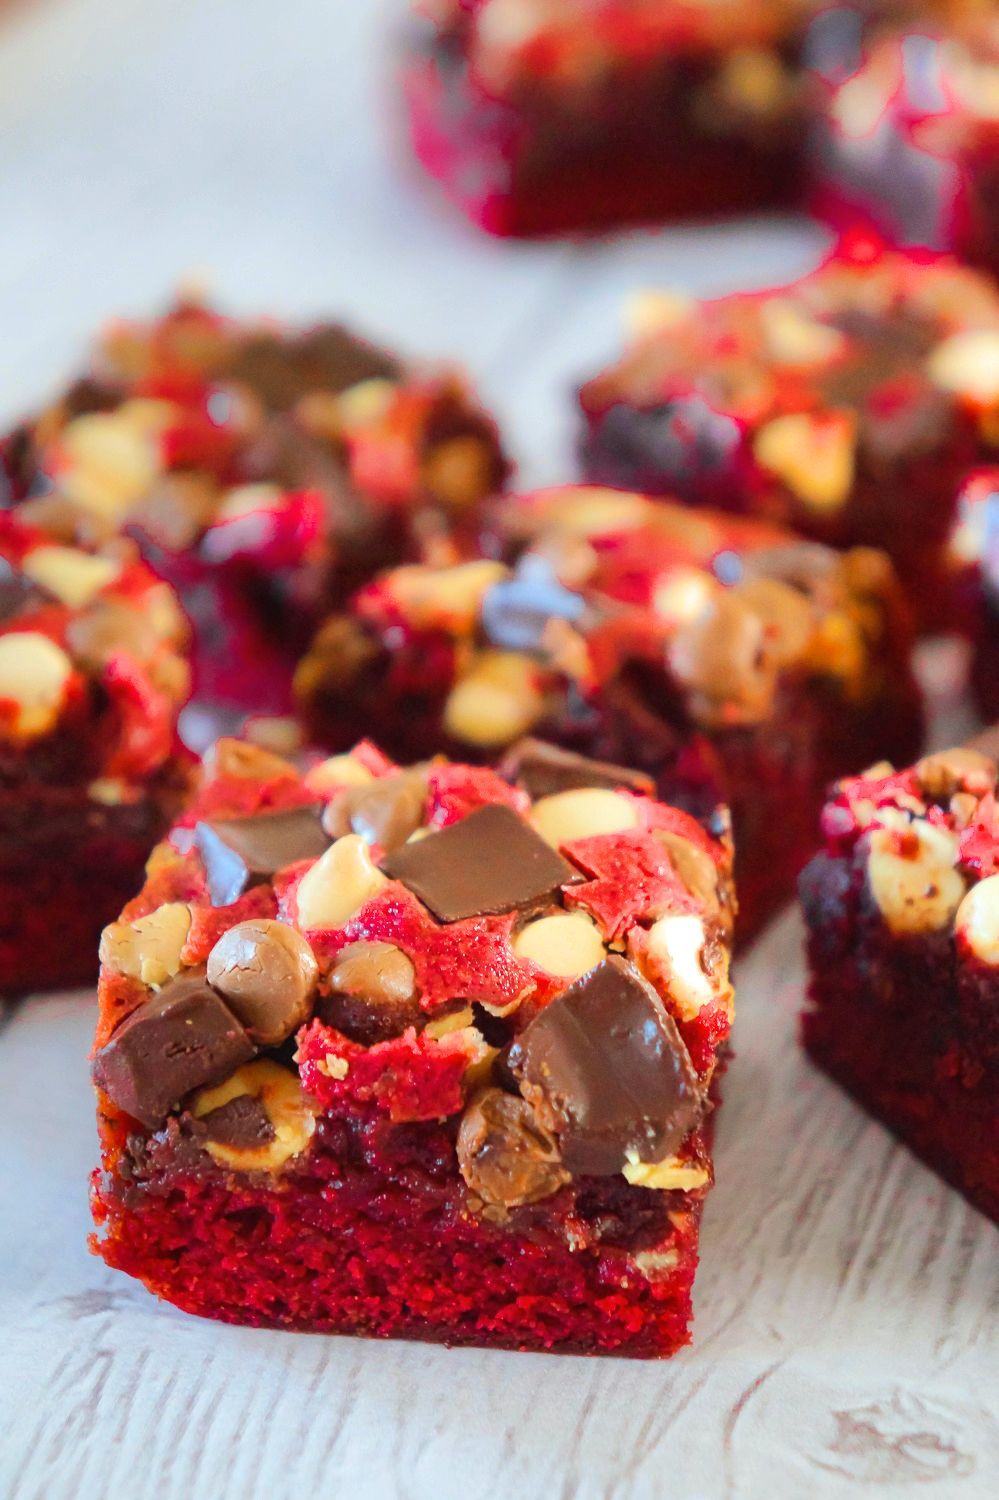 Red Velvet Brownies are delicious and chewy homemade brownies loaded with white chocolate chips, dark chocolate chunks and milk chocolate chips. These decadent red velvet treats are the perfect Valentine's Day dessert.